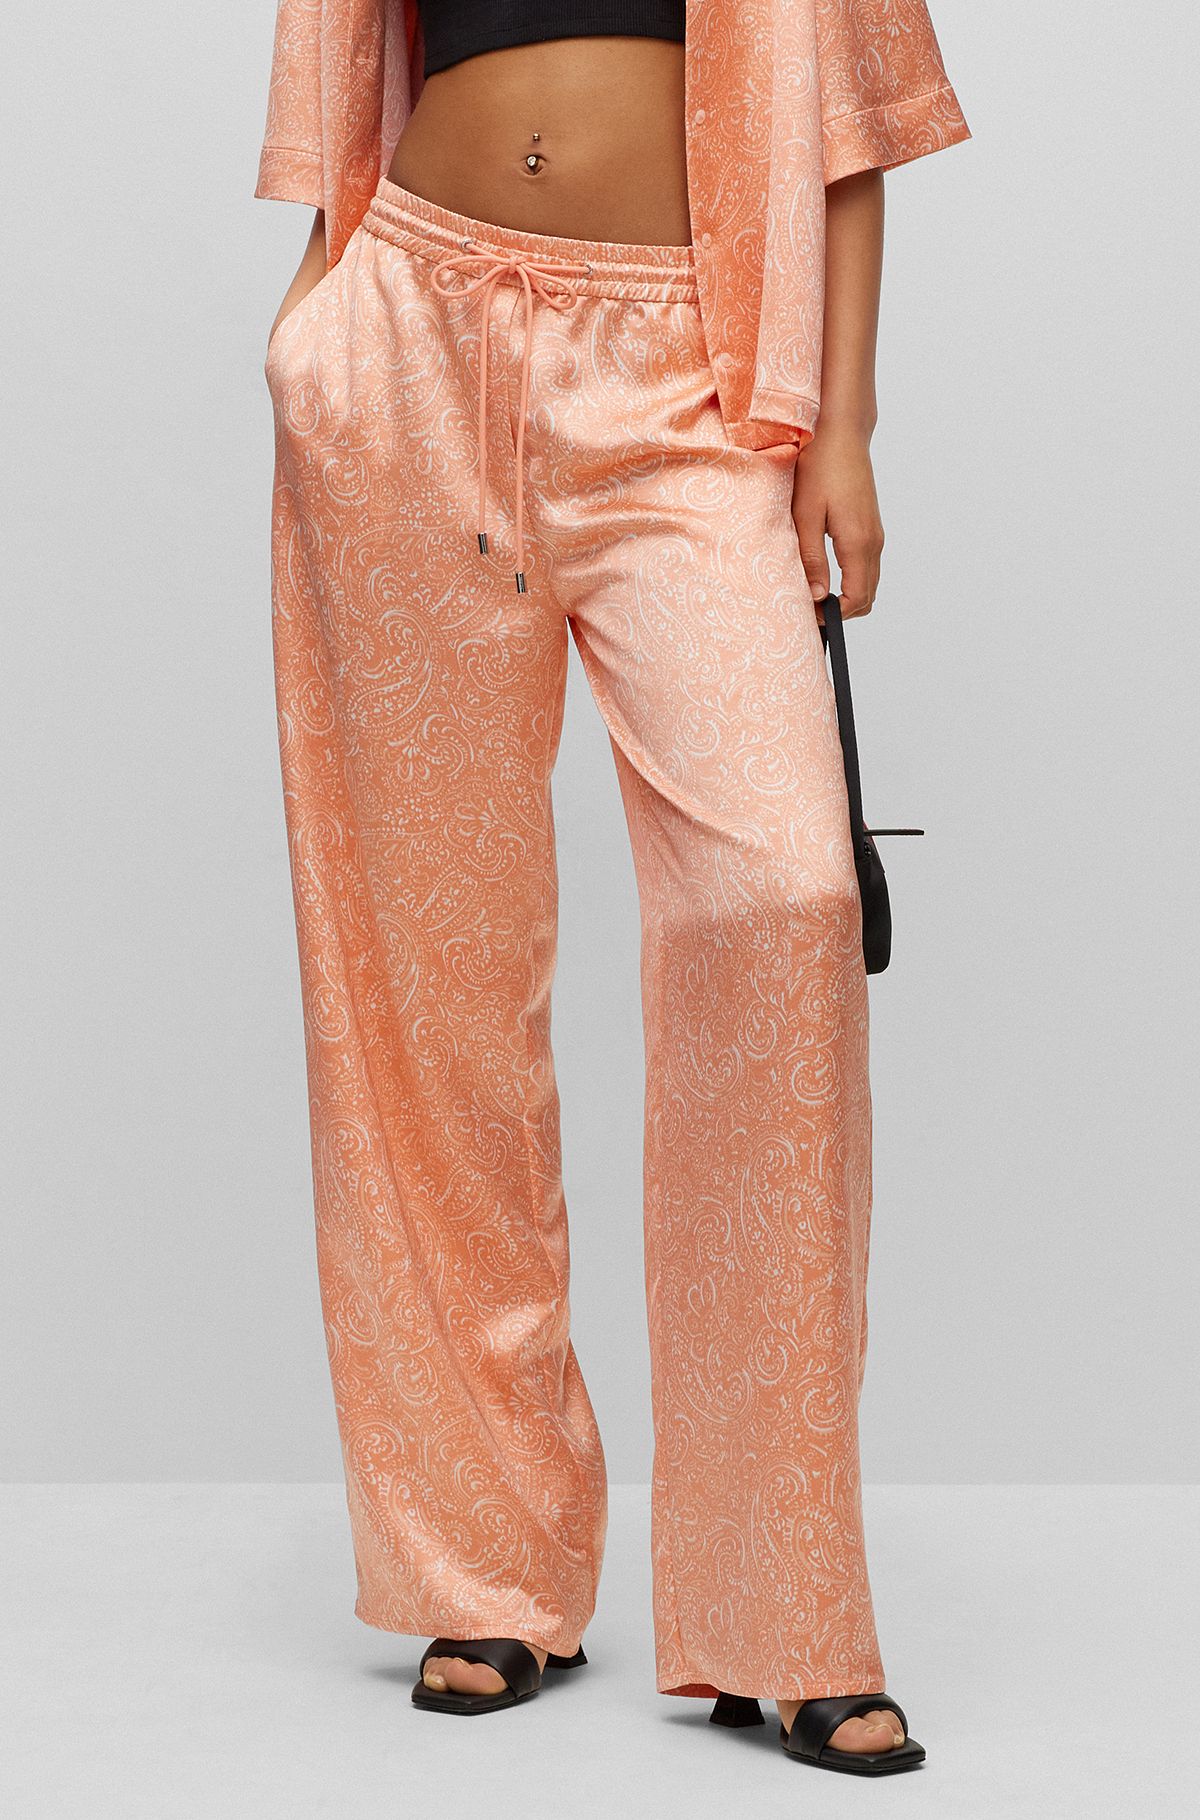 Relaxed-fit trousers in paisley-print satin, Patterned